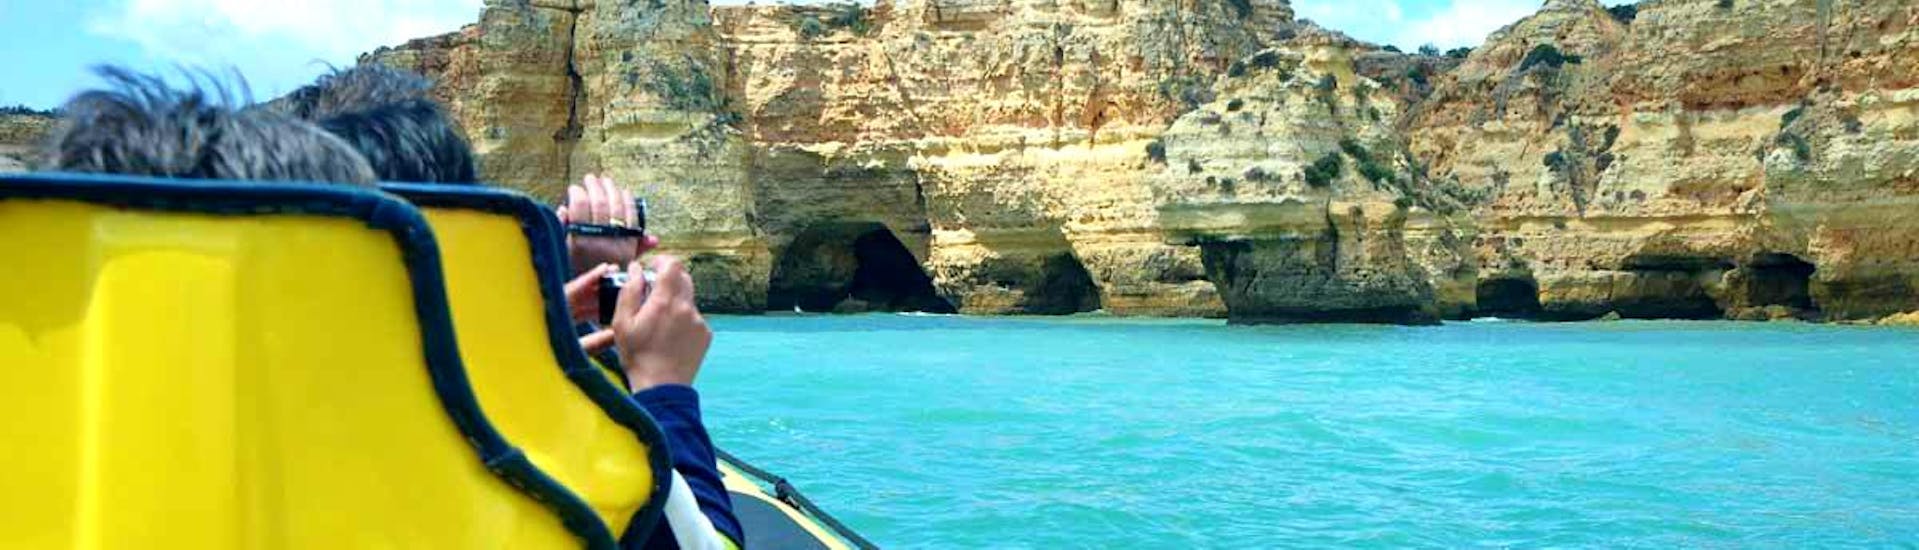 The passengers of the Insónia enjoy the beautiful view of the coastline on their Boat Tour "Caves & Dolphins" in Albufeira.